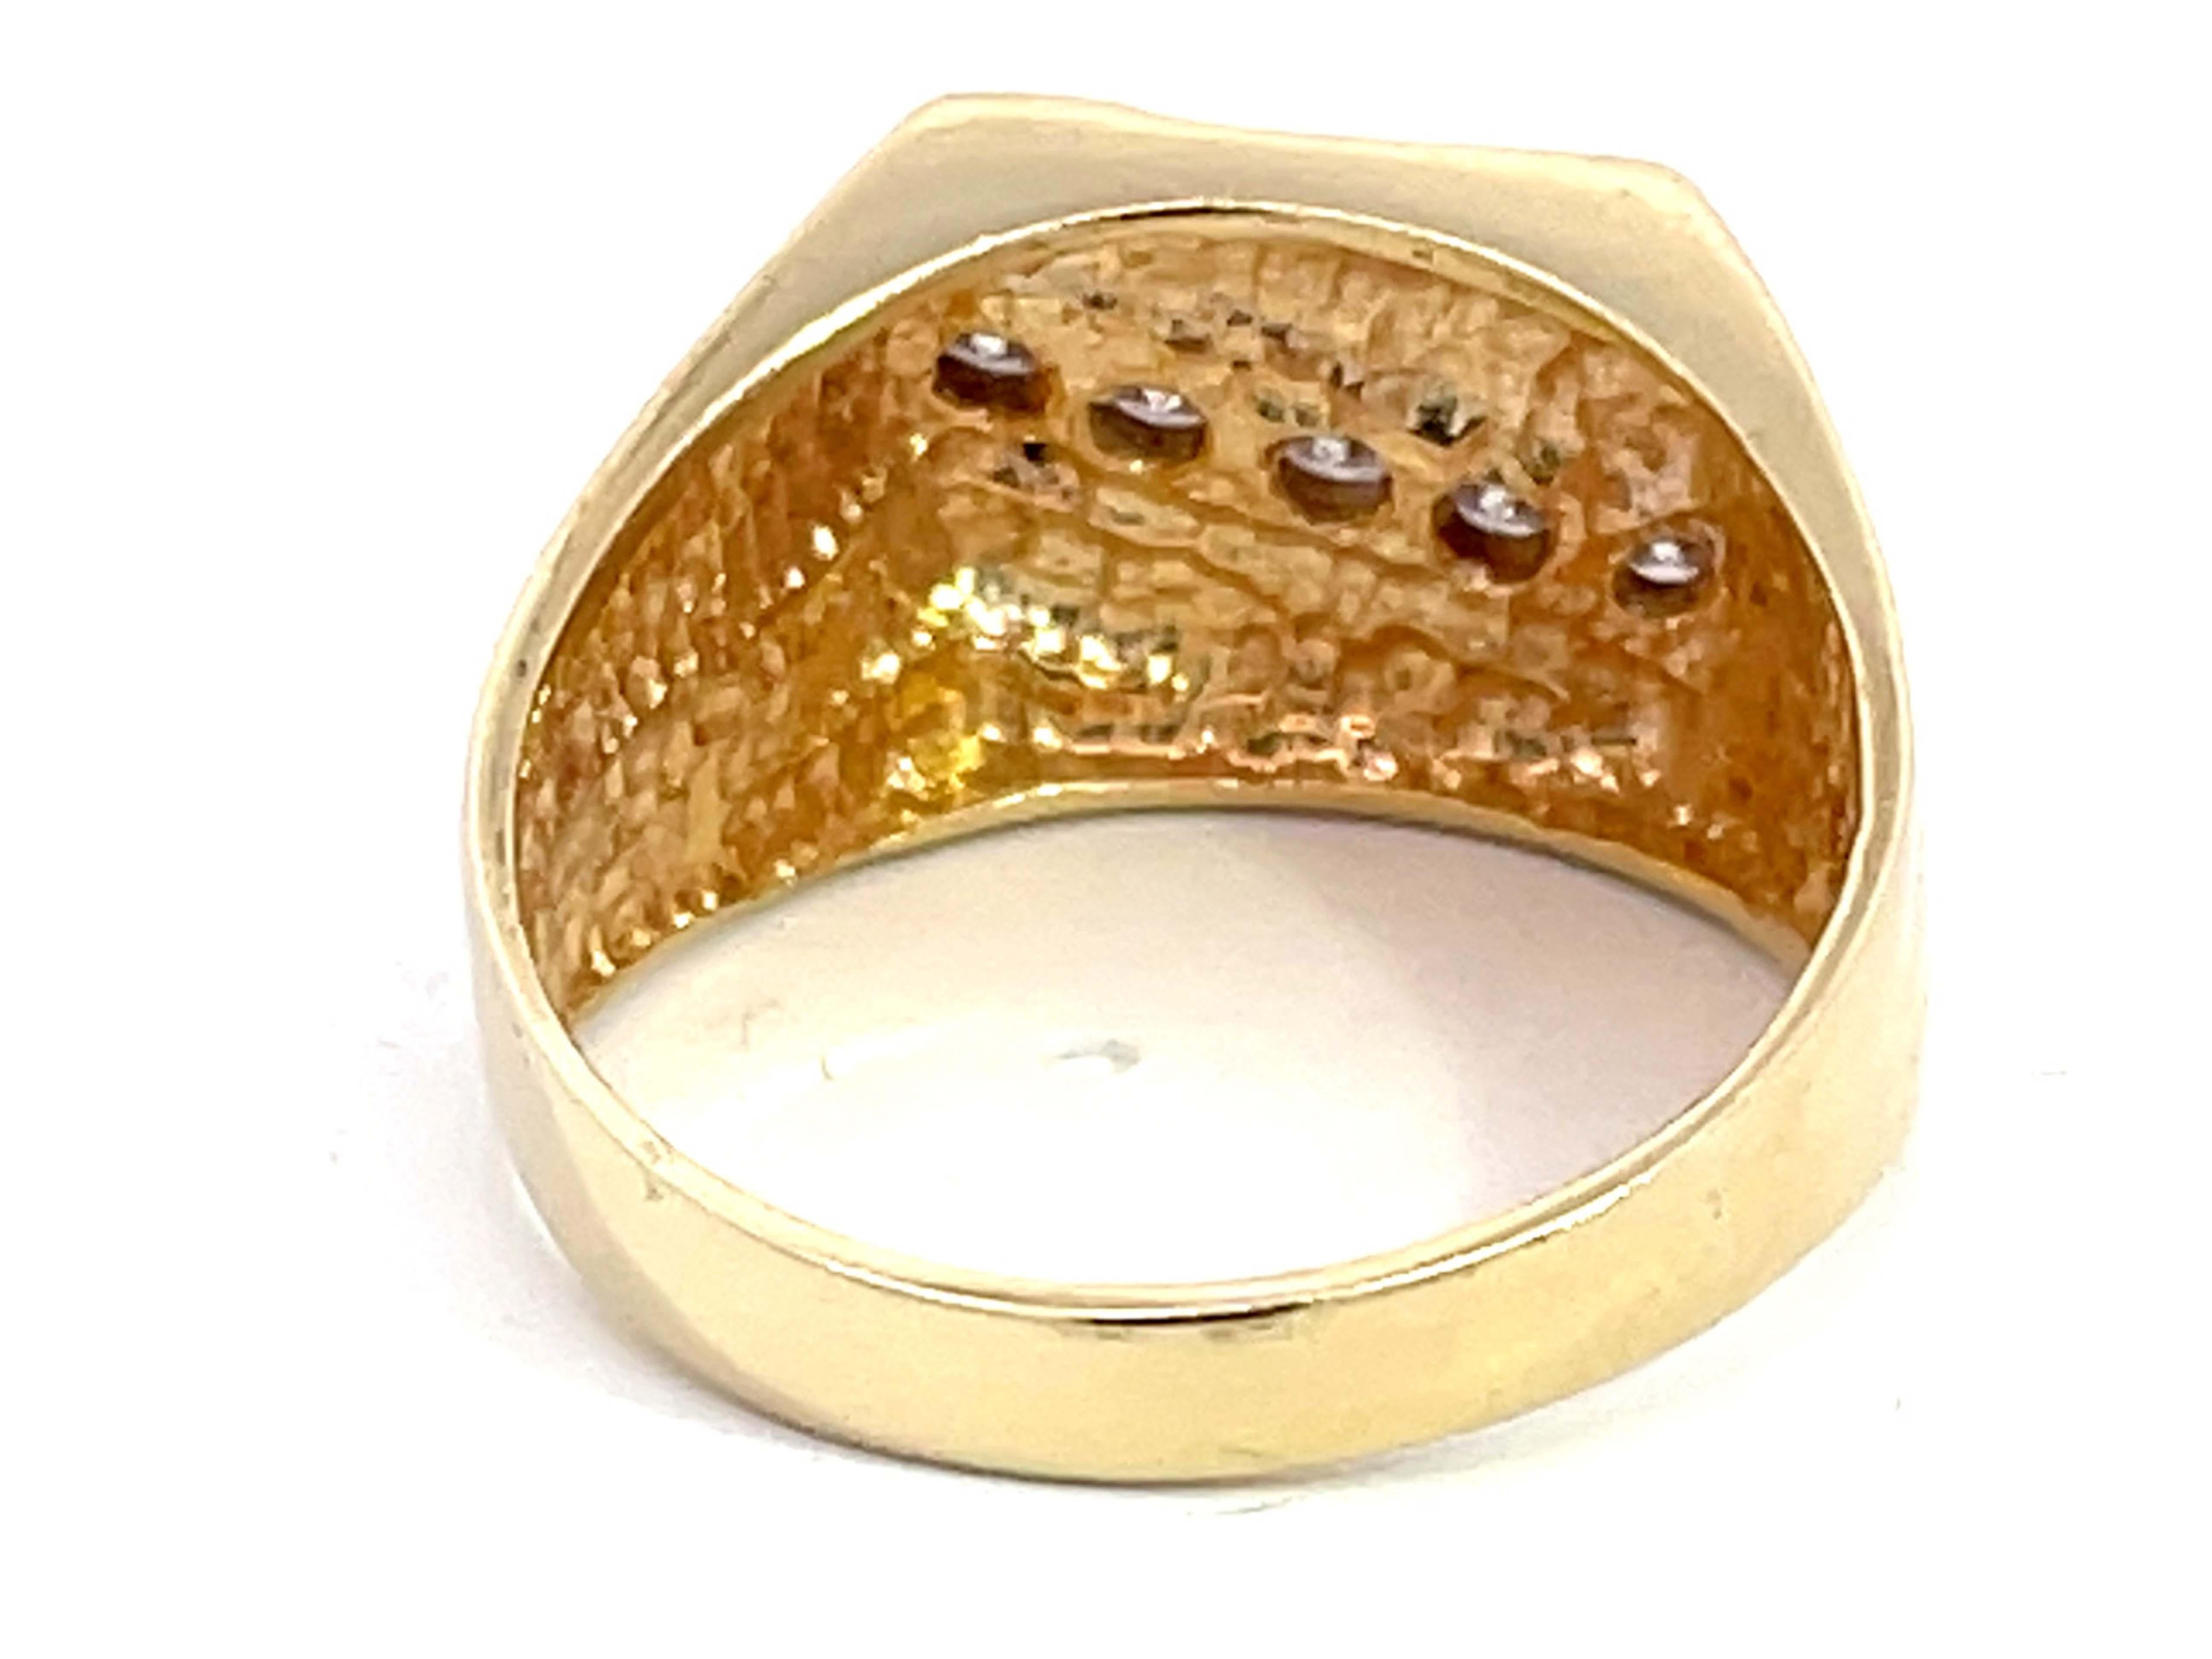 Mens Brilliant Cut 5 Diamond Ring in 14k Yellow Gold In Excellent Condition For Sale In Honolulu, HI